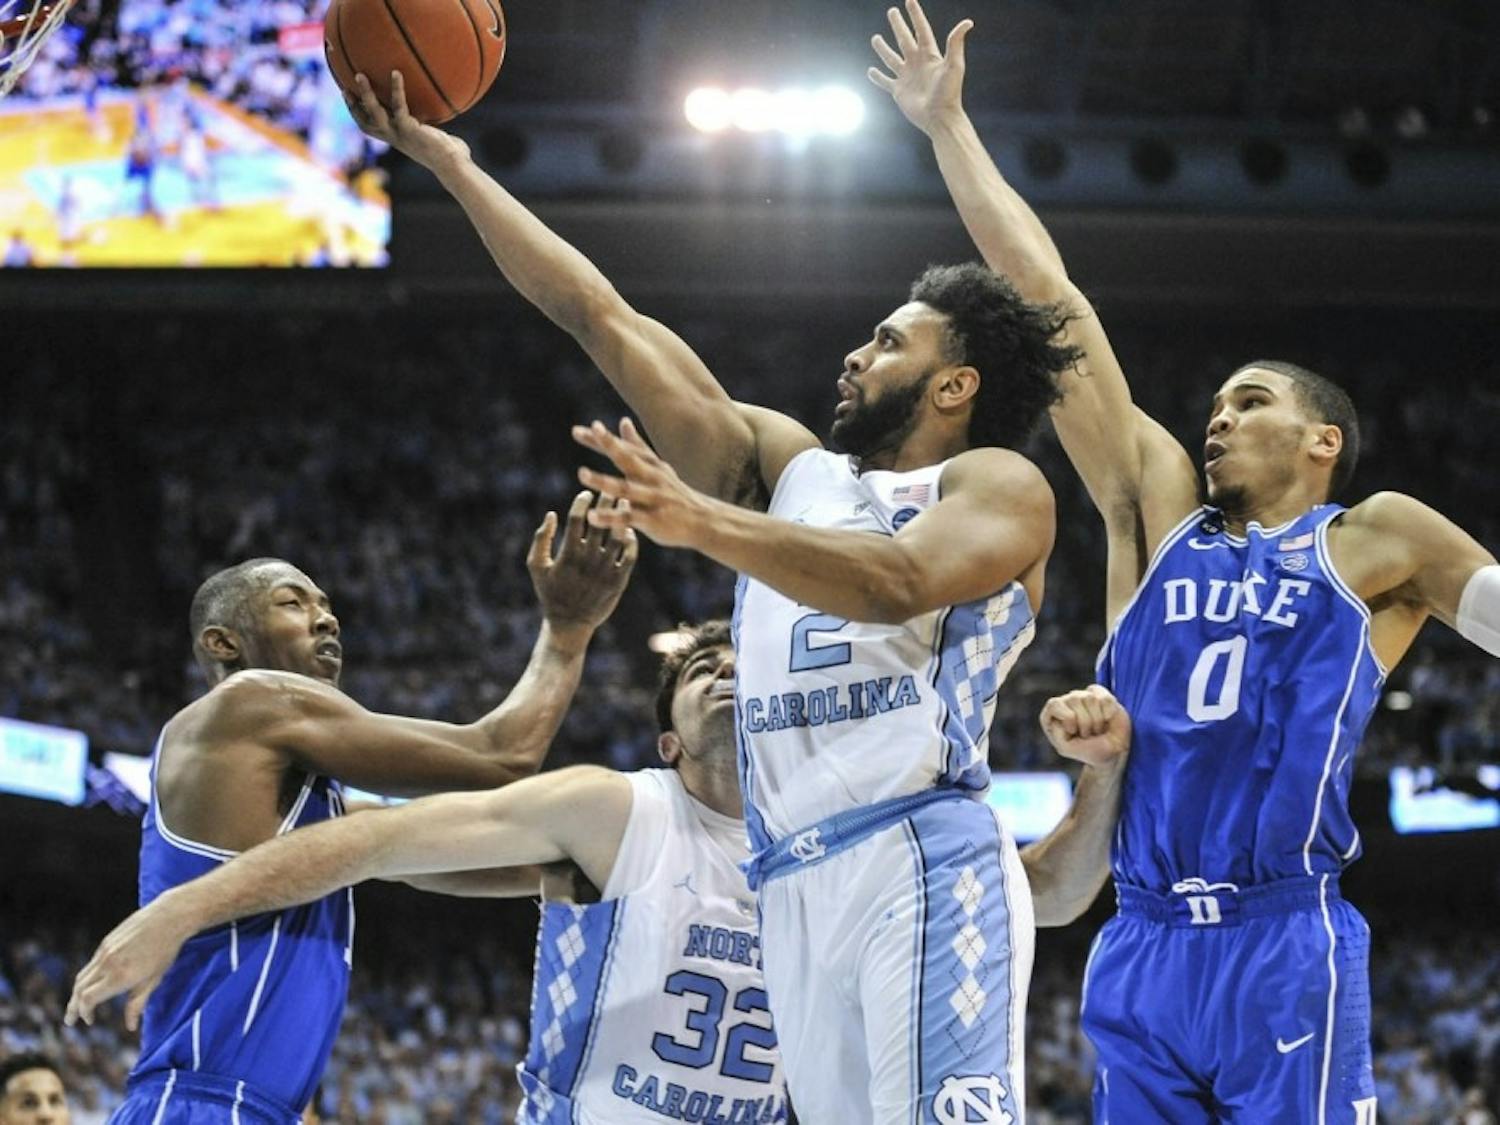 Guard Joel Berry II (2) goes up for a shot in No. 5 UNC’s 90-83 win over No. 17 Duke on March 4 in the Smith Center. Berry finished with a team-high 28 points and five made 3-pointers.